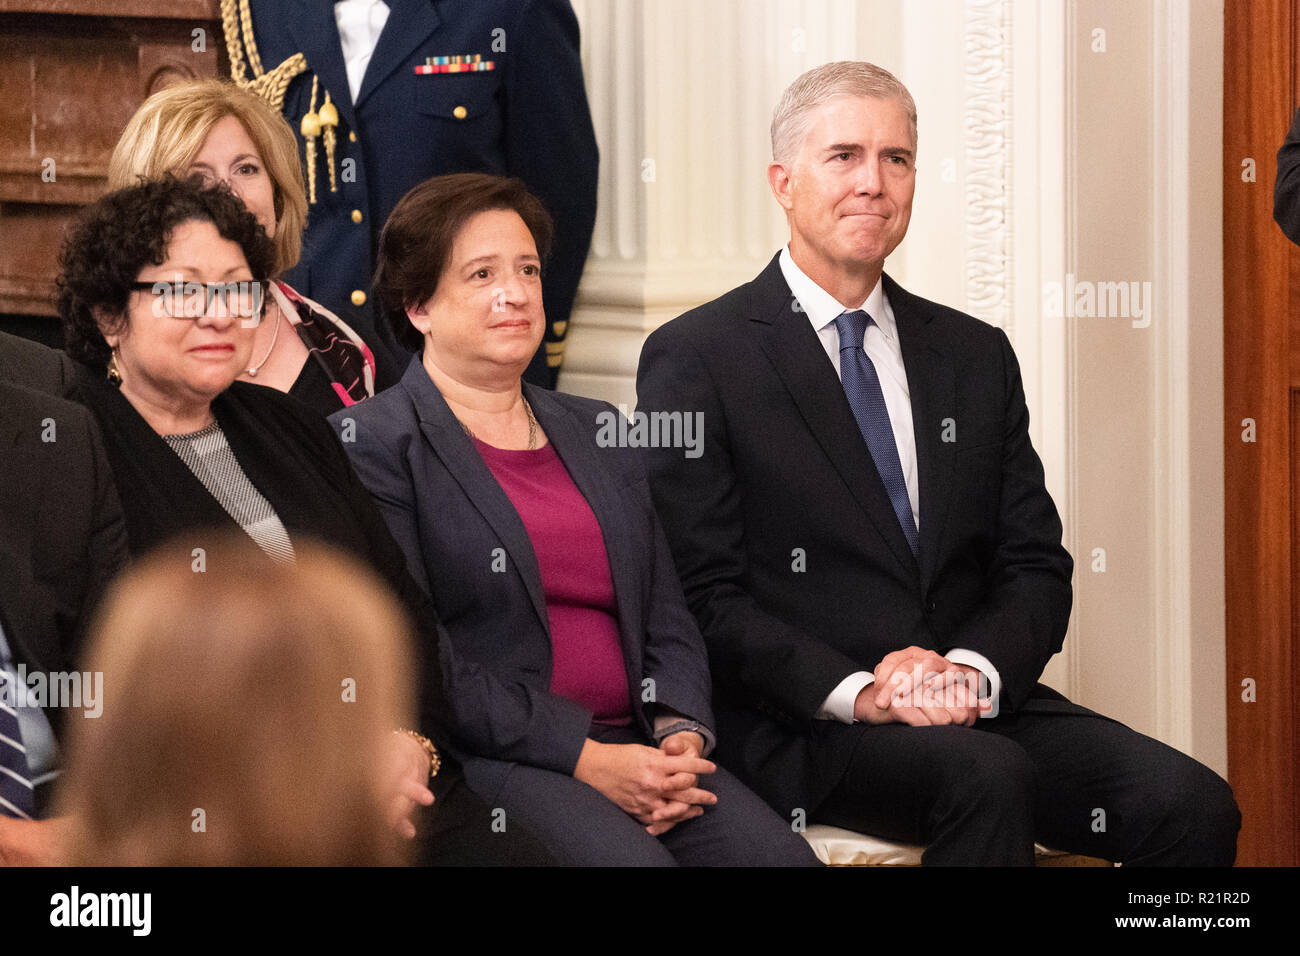 Supreme Court Justices Sonia Sotomayor, Elena Kagan and Neil Gorsuch at the swearing in of Brett Kavanaugh as an Associate Justice of the Supreme Cour Stock Photo